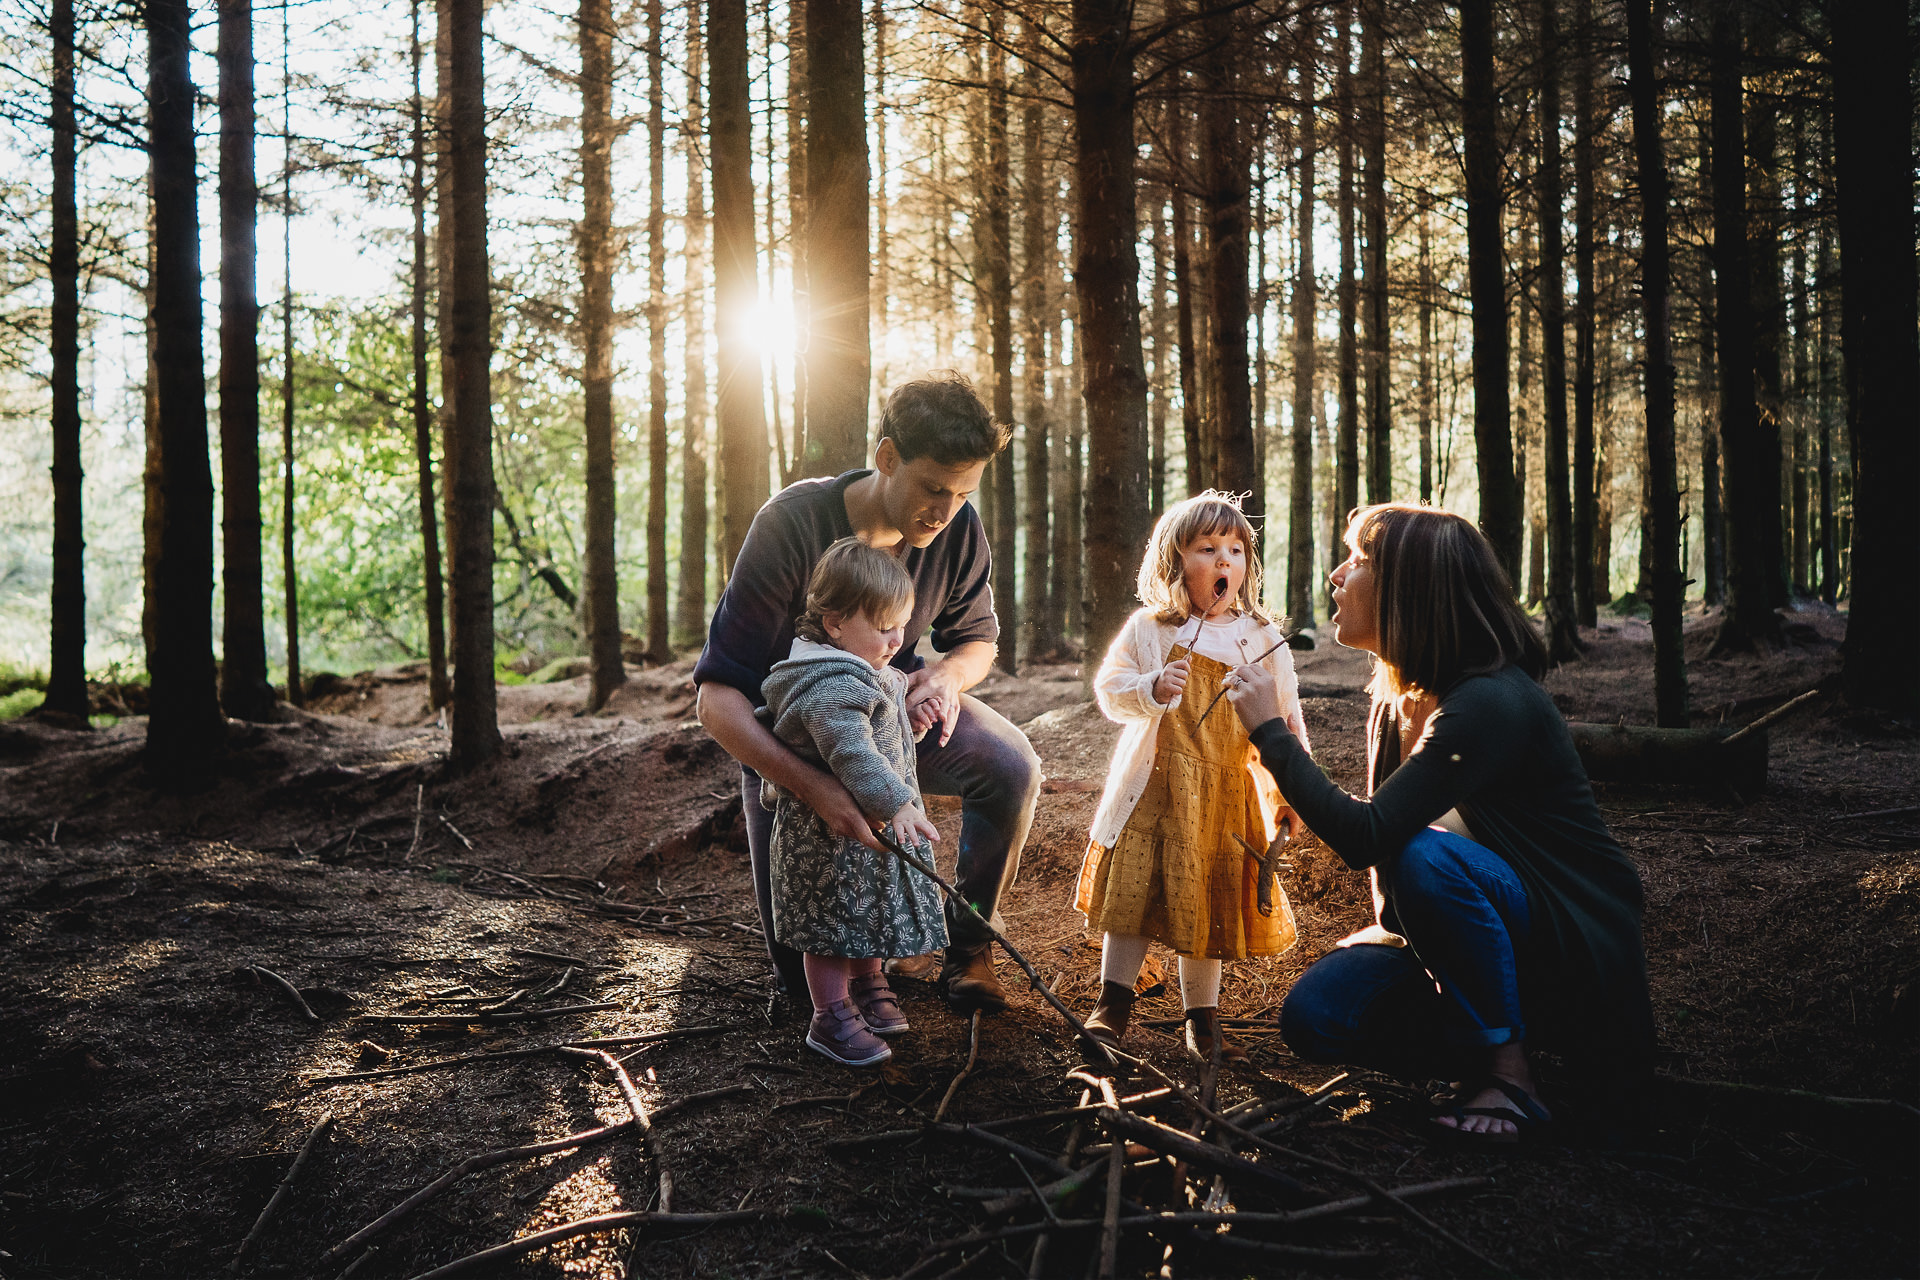 Best Devon family photography image of a family playing with sticks together in the woods